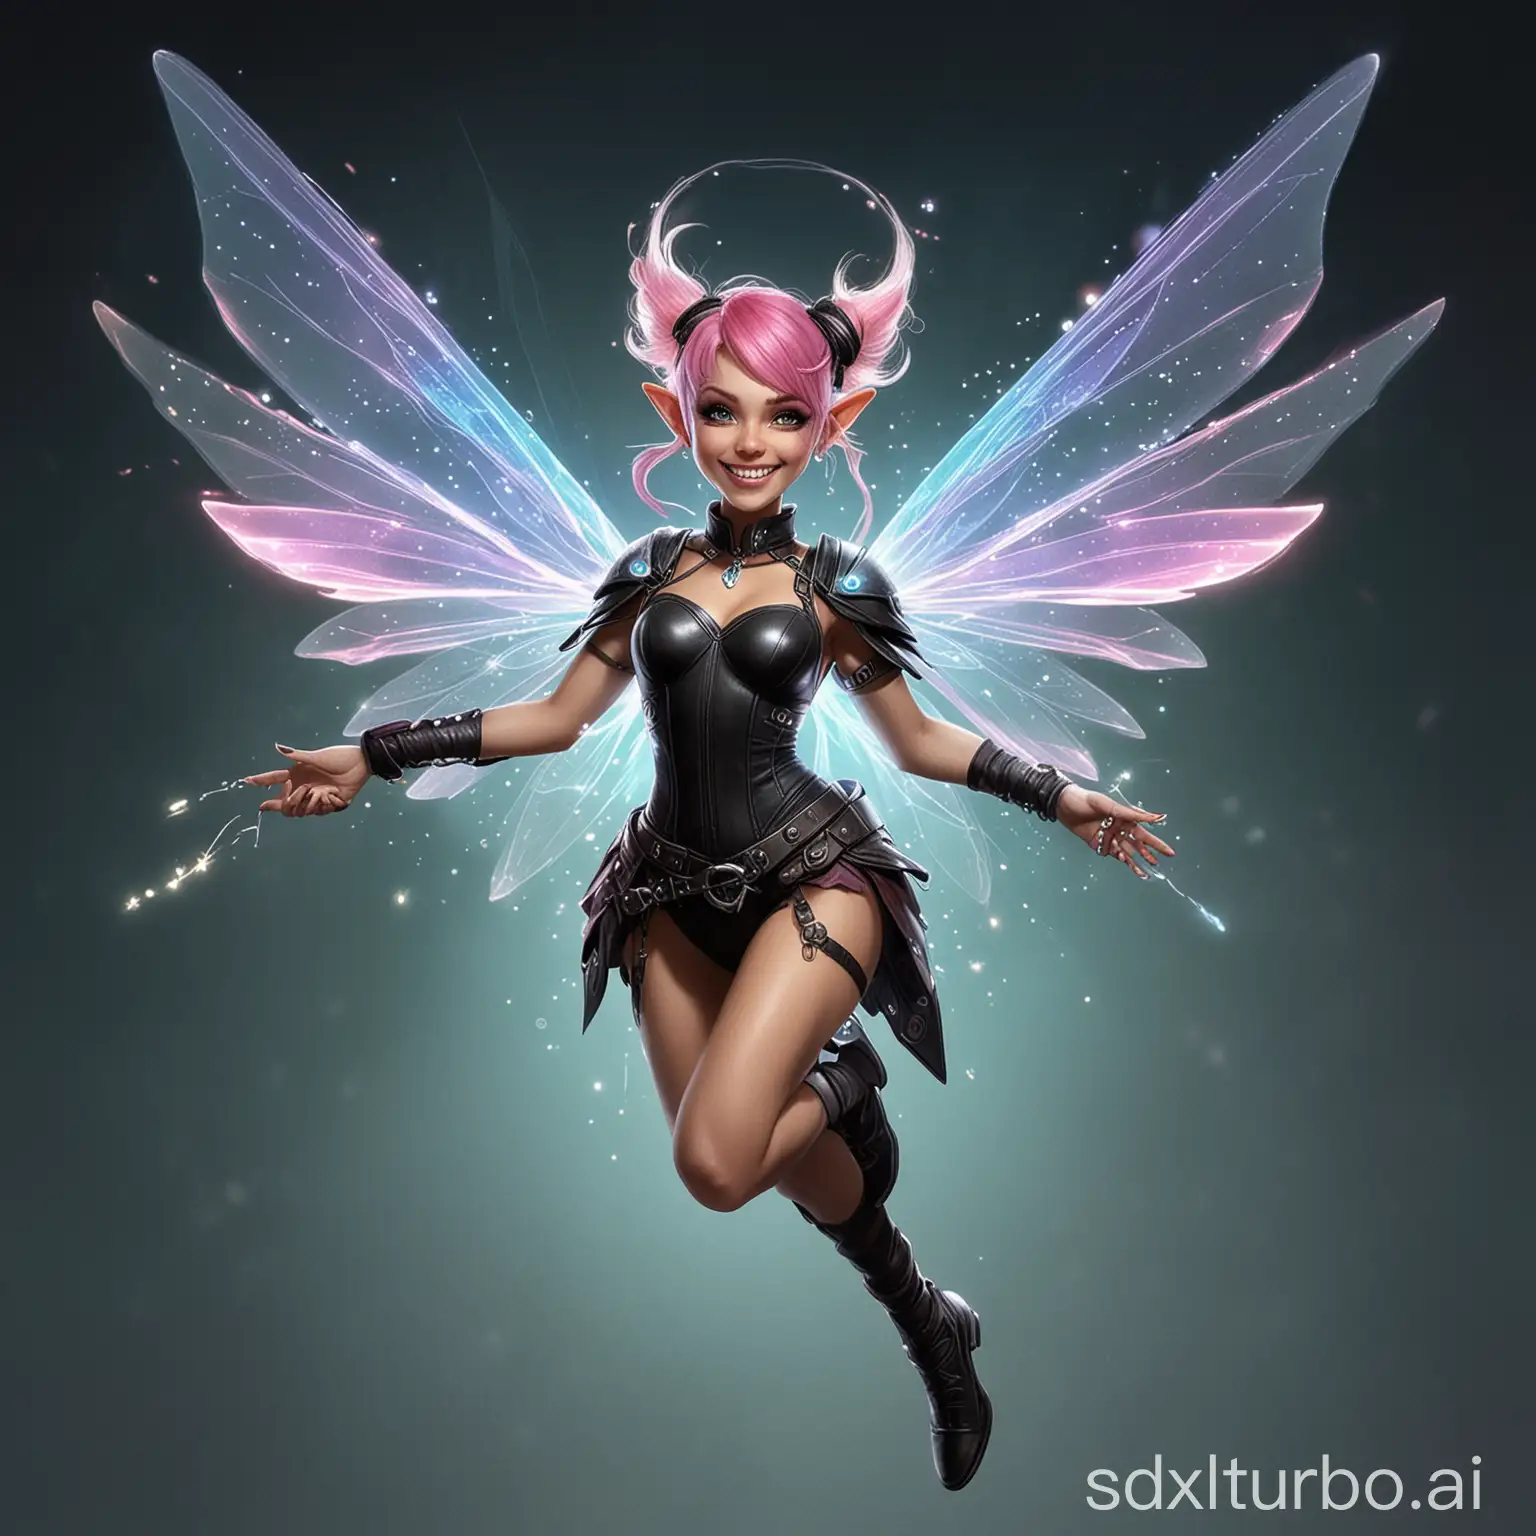 Create an image about "A Shadowrun legend". Show a bold, small, flying pixie posing like a diva and grinning. The pixie flies with sparkling, translucent fey-wings and holds a small hologram in the left hand.